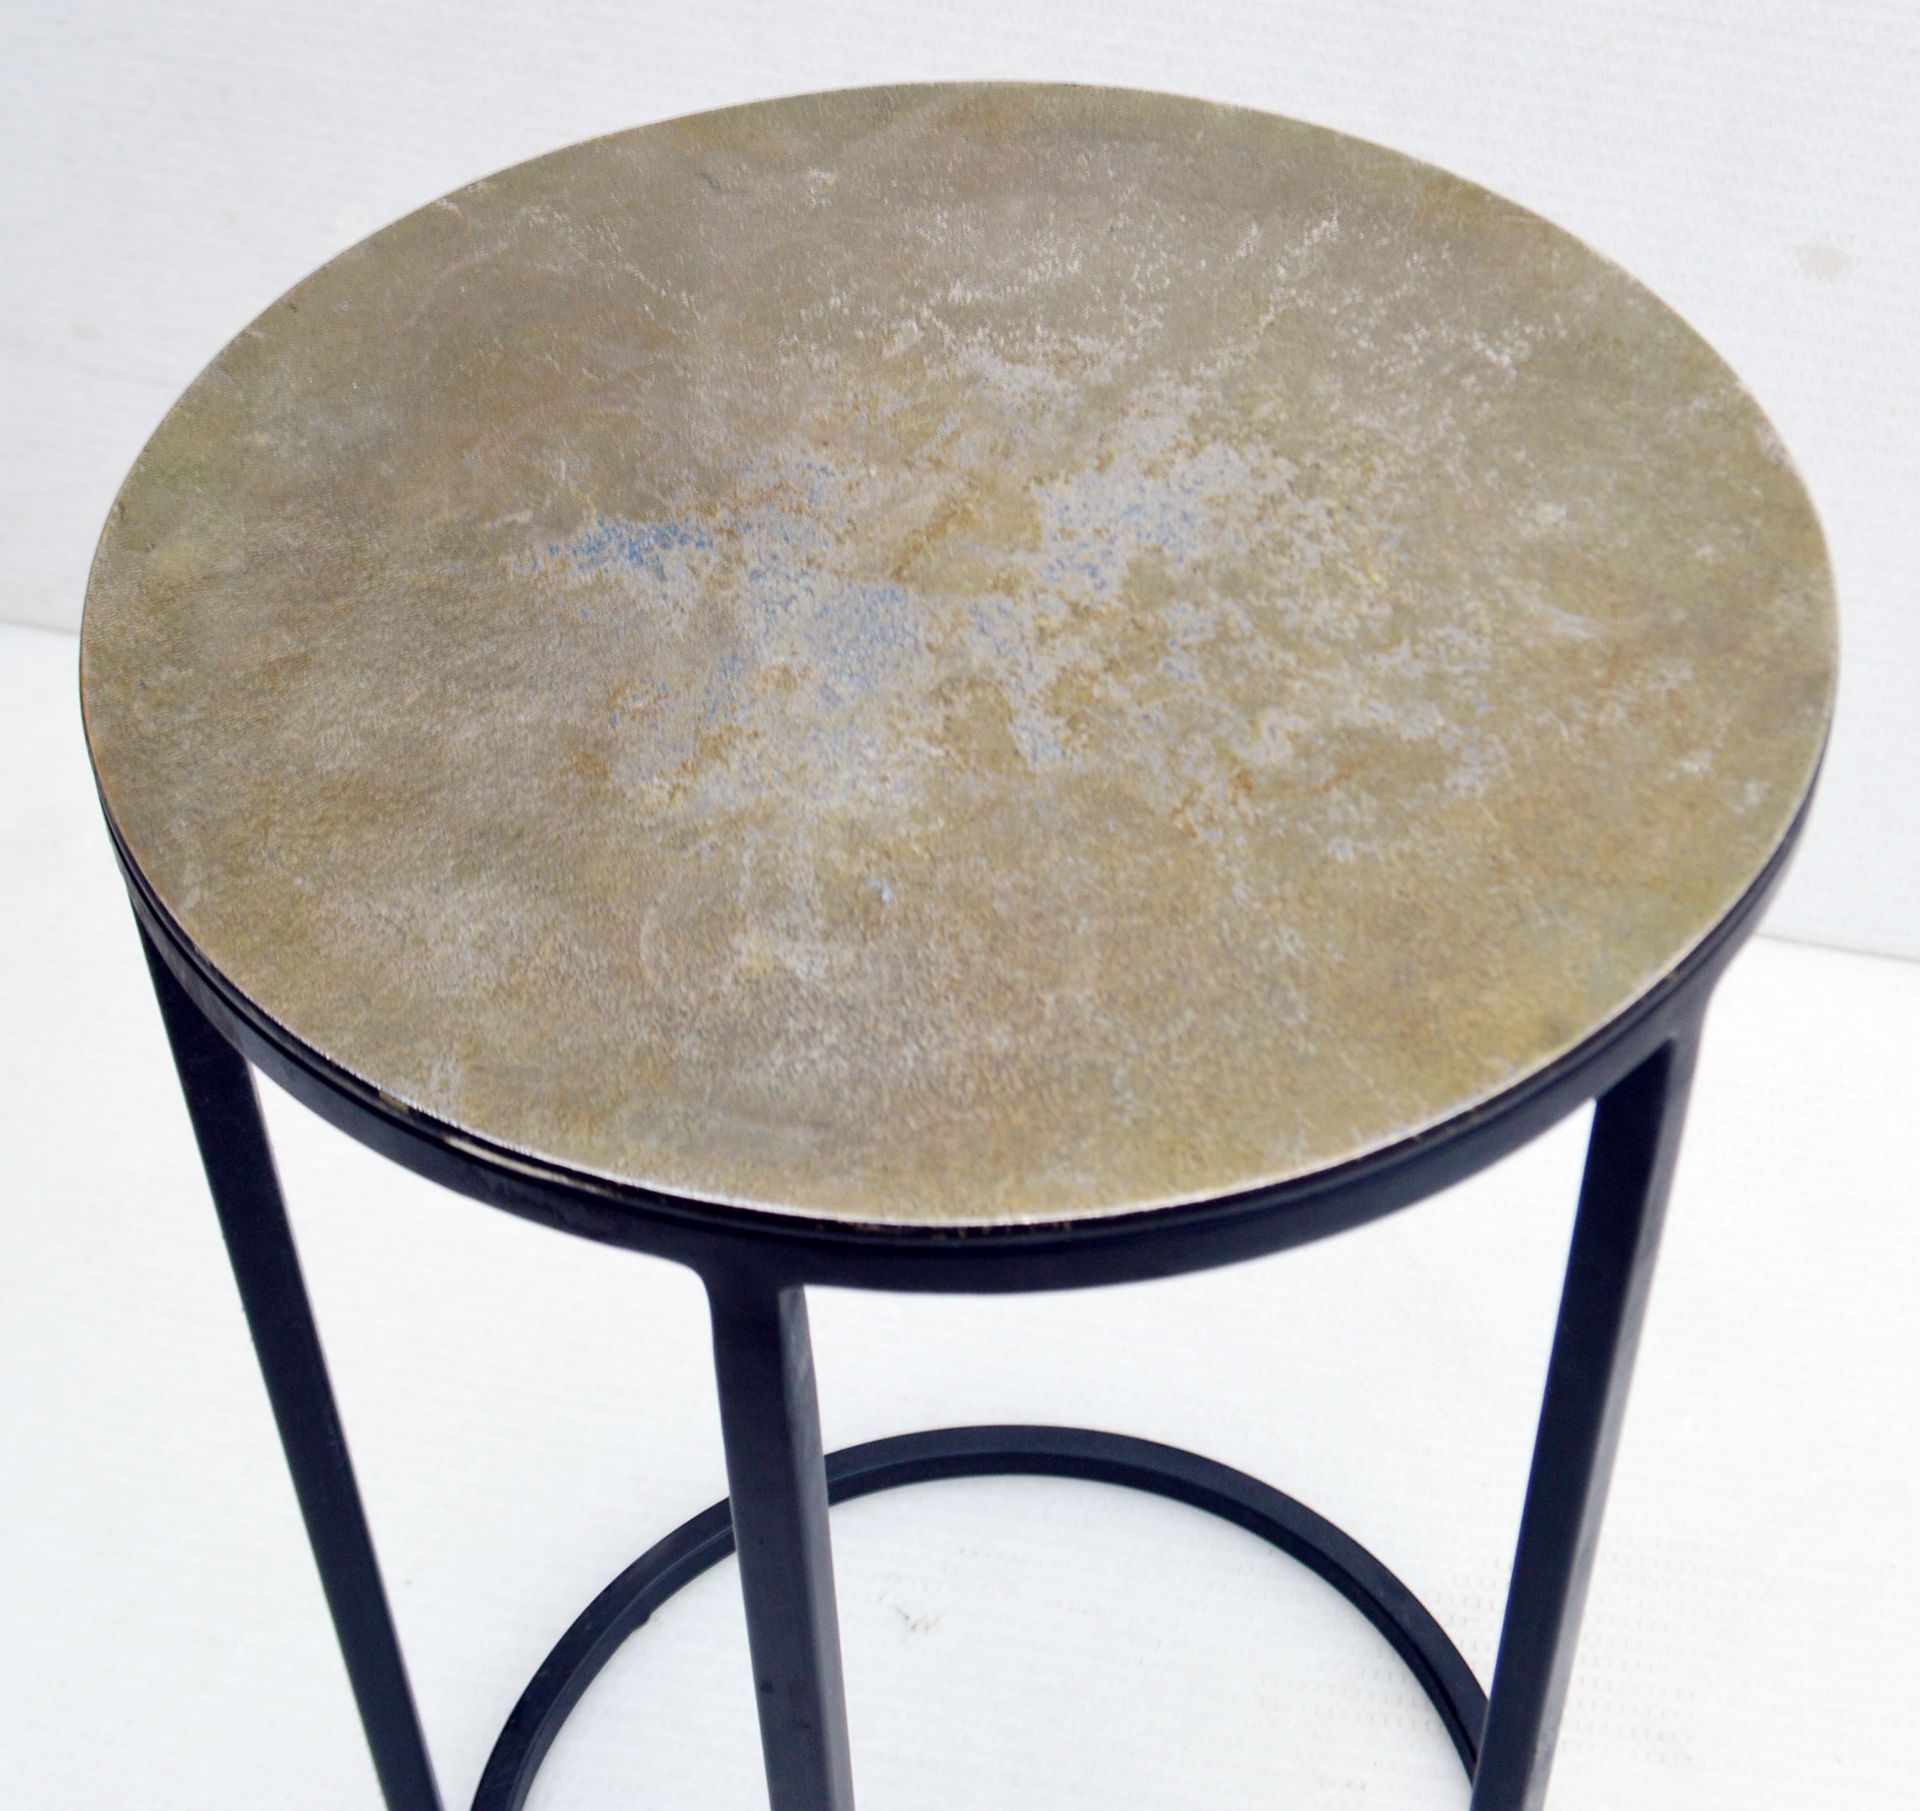 A Pair Of Elegant Circular Side Tables With Slim Metal Bases And Textured Brass Finish - Dimensions: - Image 3 of 4